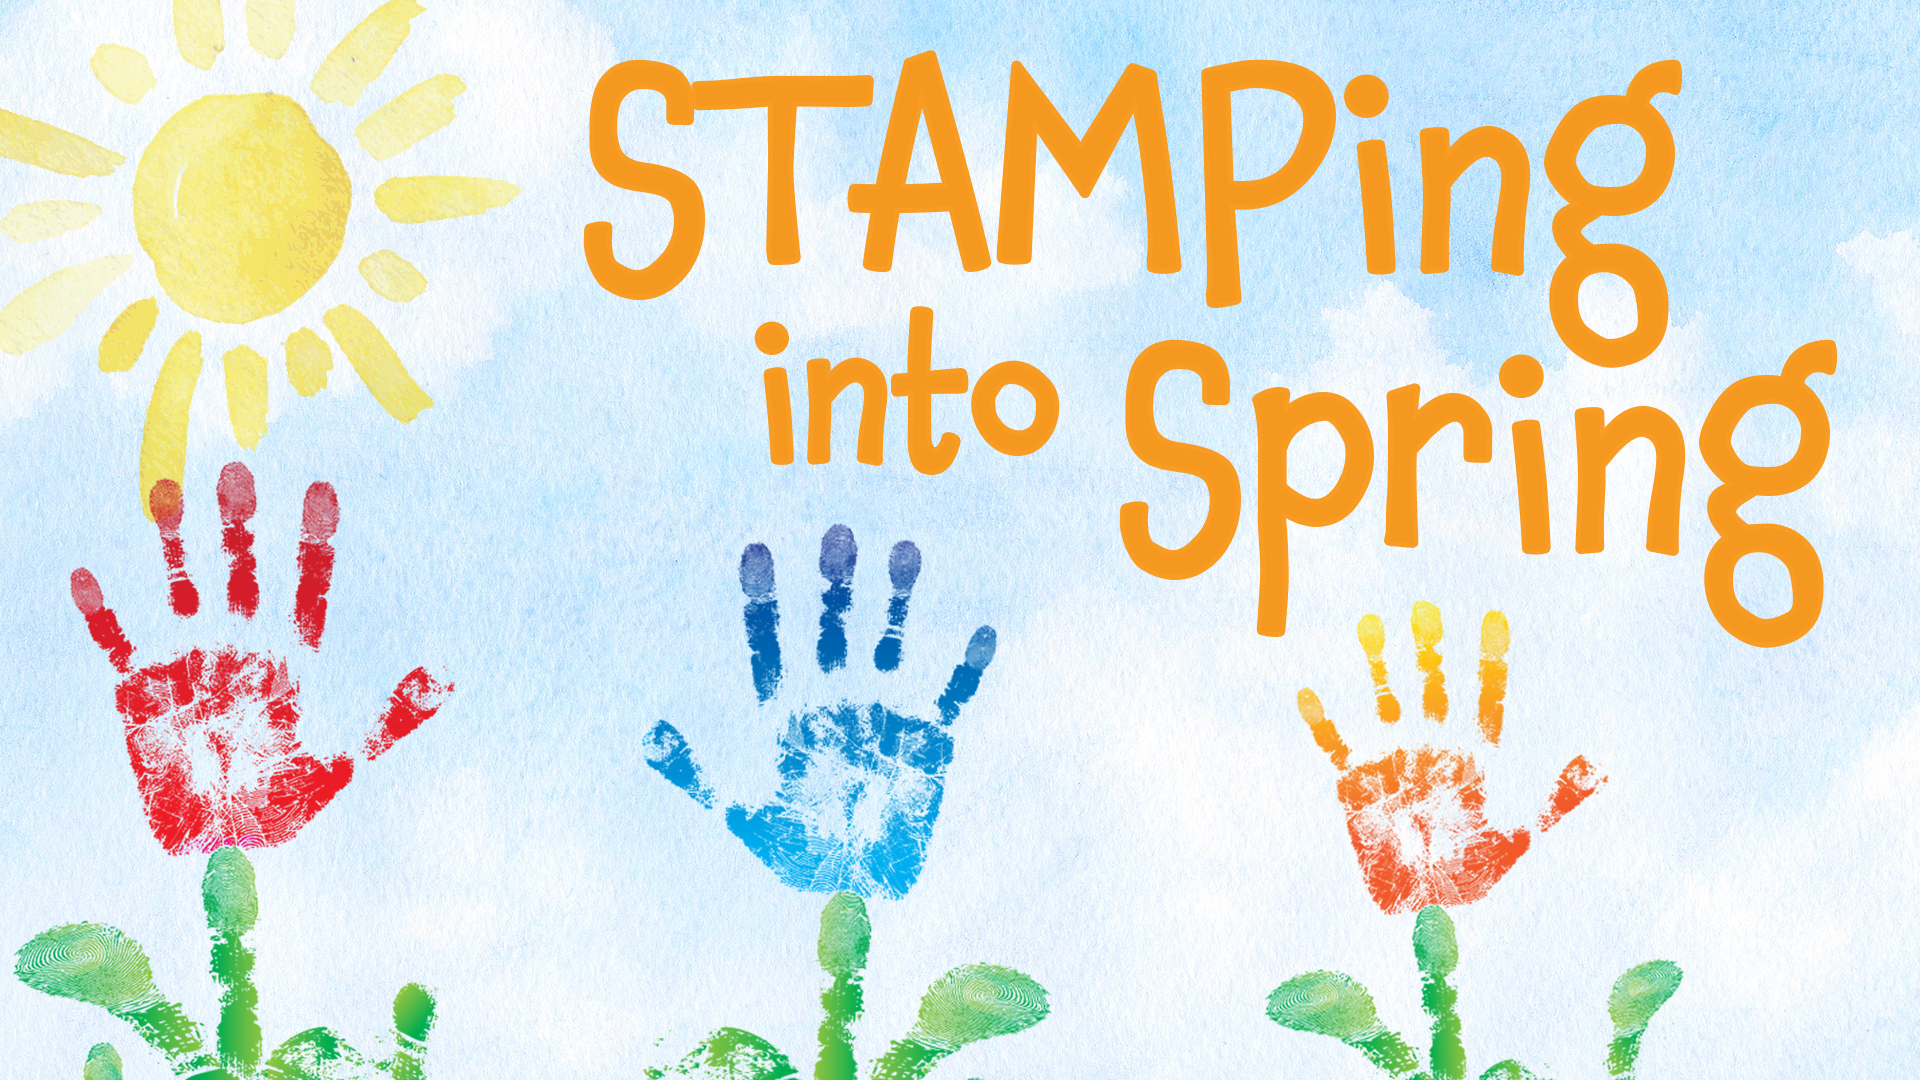 Image reads "Stamping Into Spring" against a blue watercolor background. Handprint flowers are stamped along the bottom of the image.